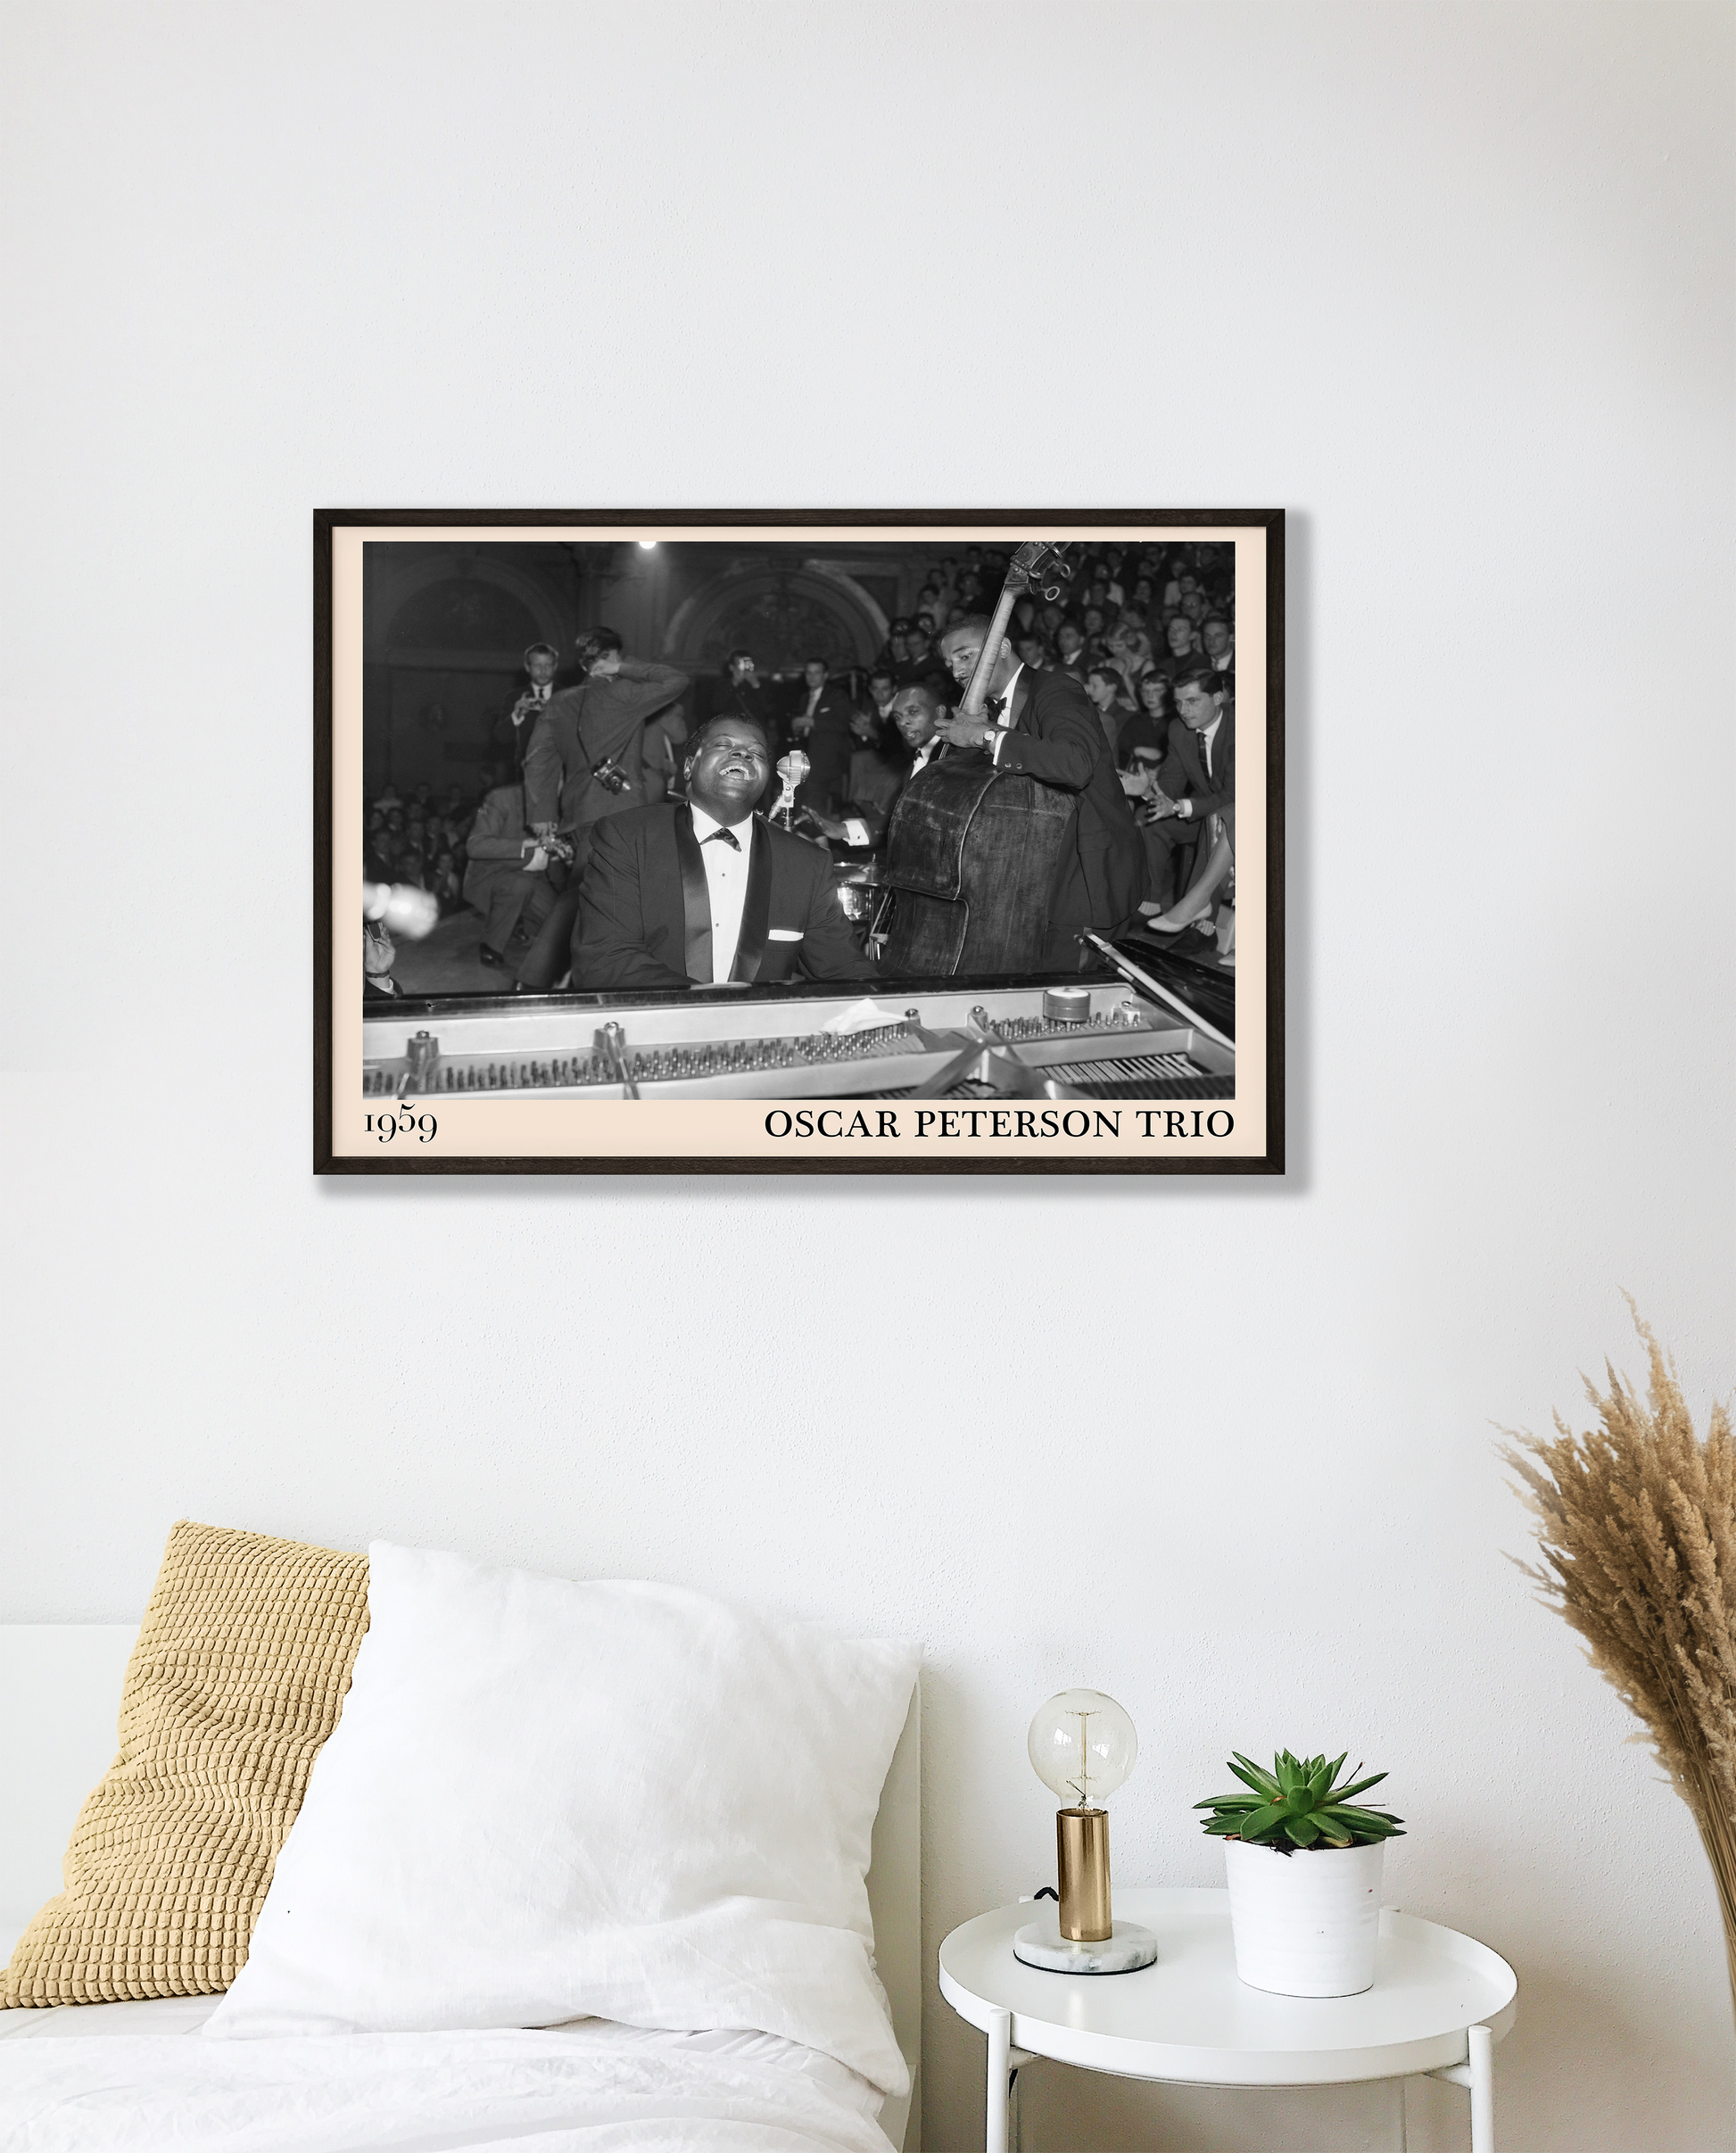 1959 picture of the Oscar Peterson Trio. Picture crafted into a cool black framed music poster, with an off-white border. Poster is hanging on a white bedroom wall